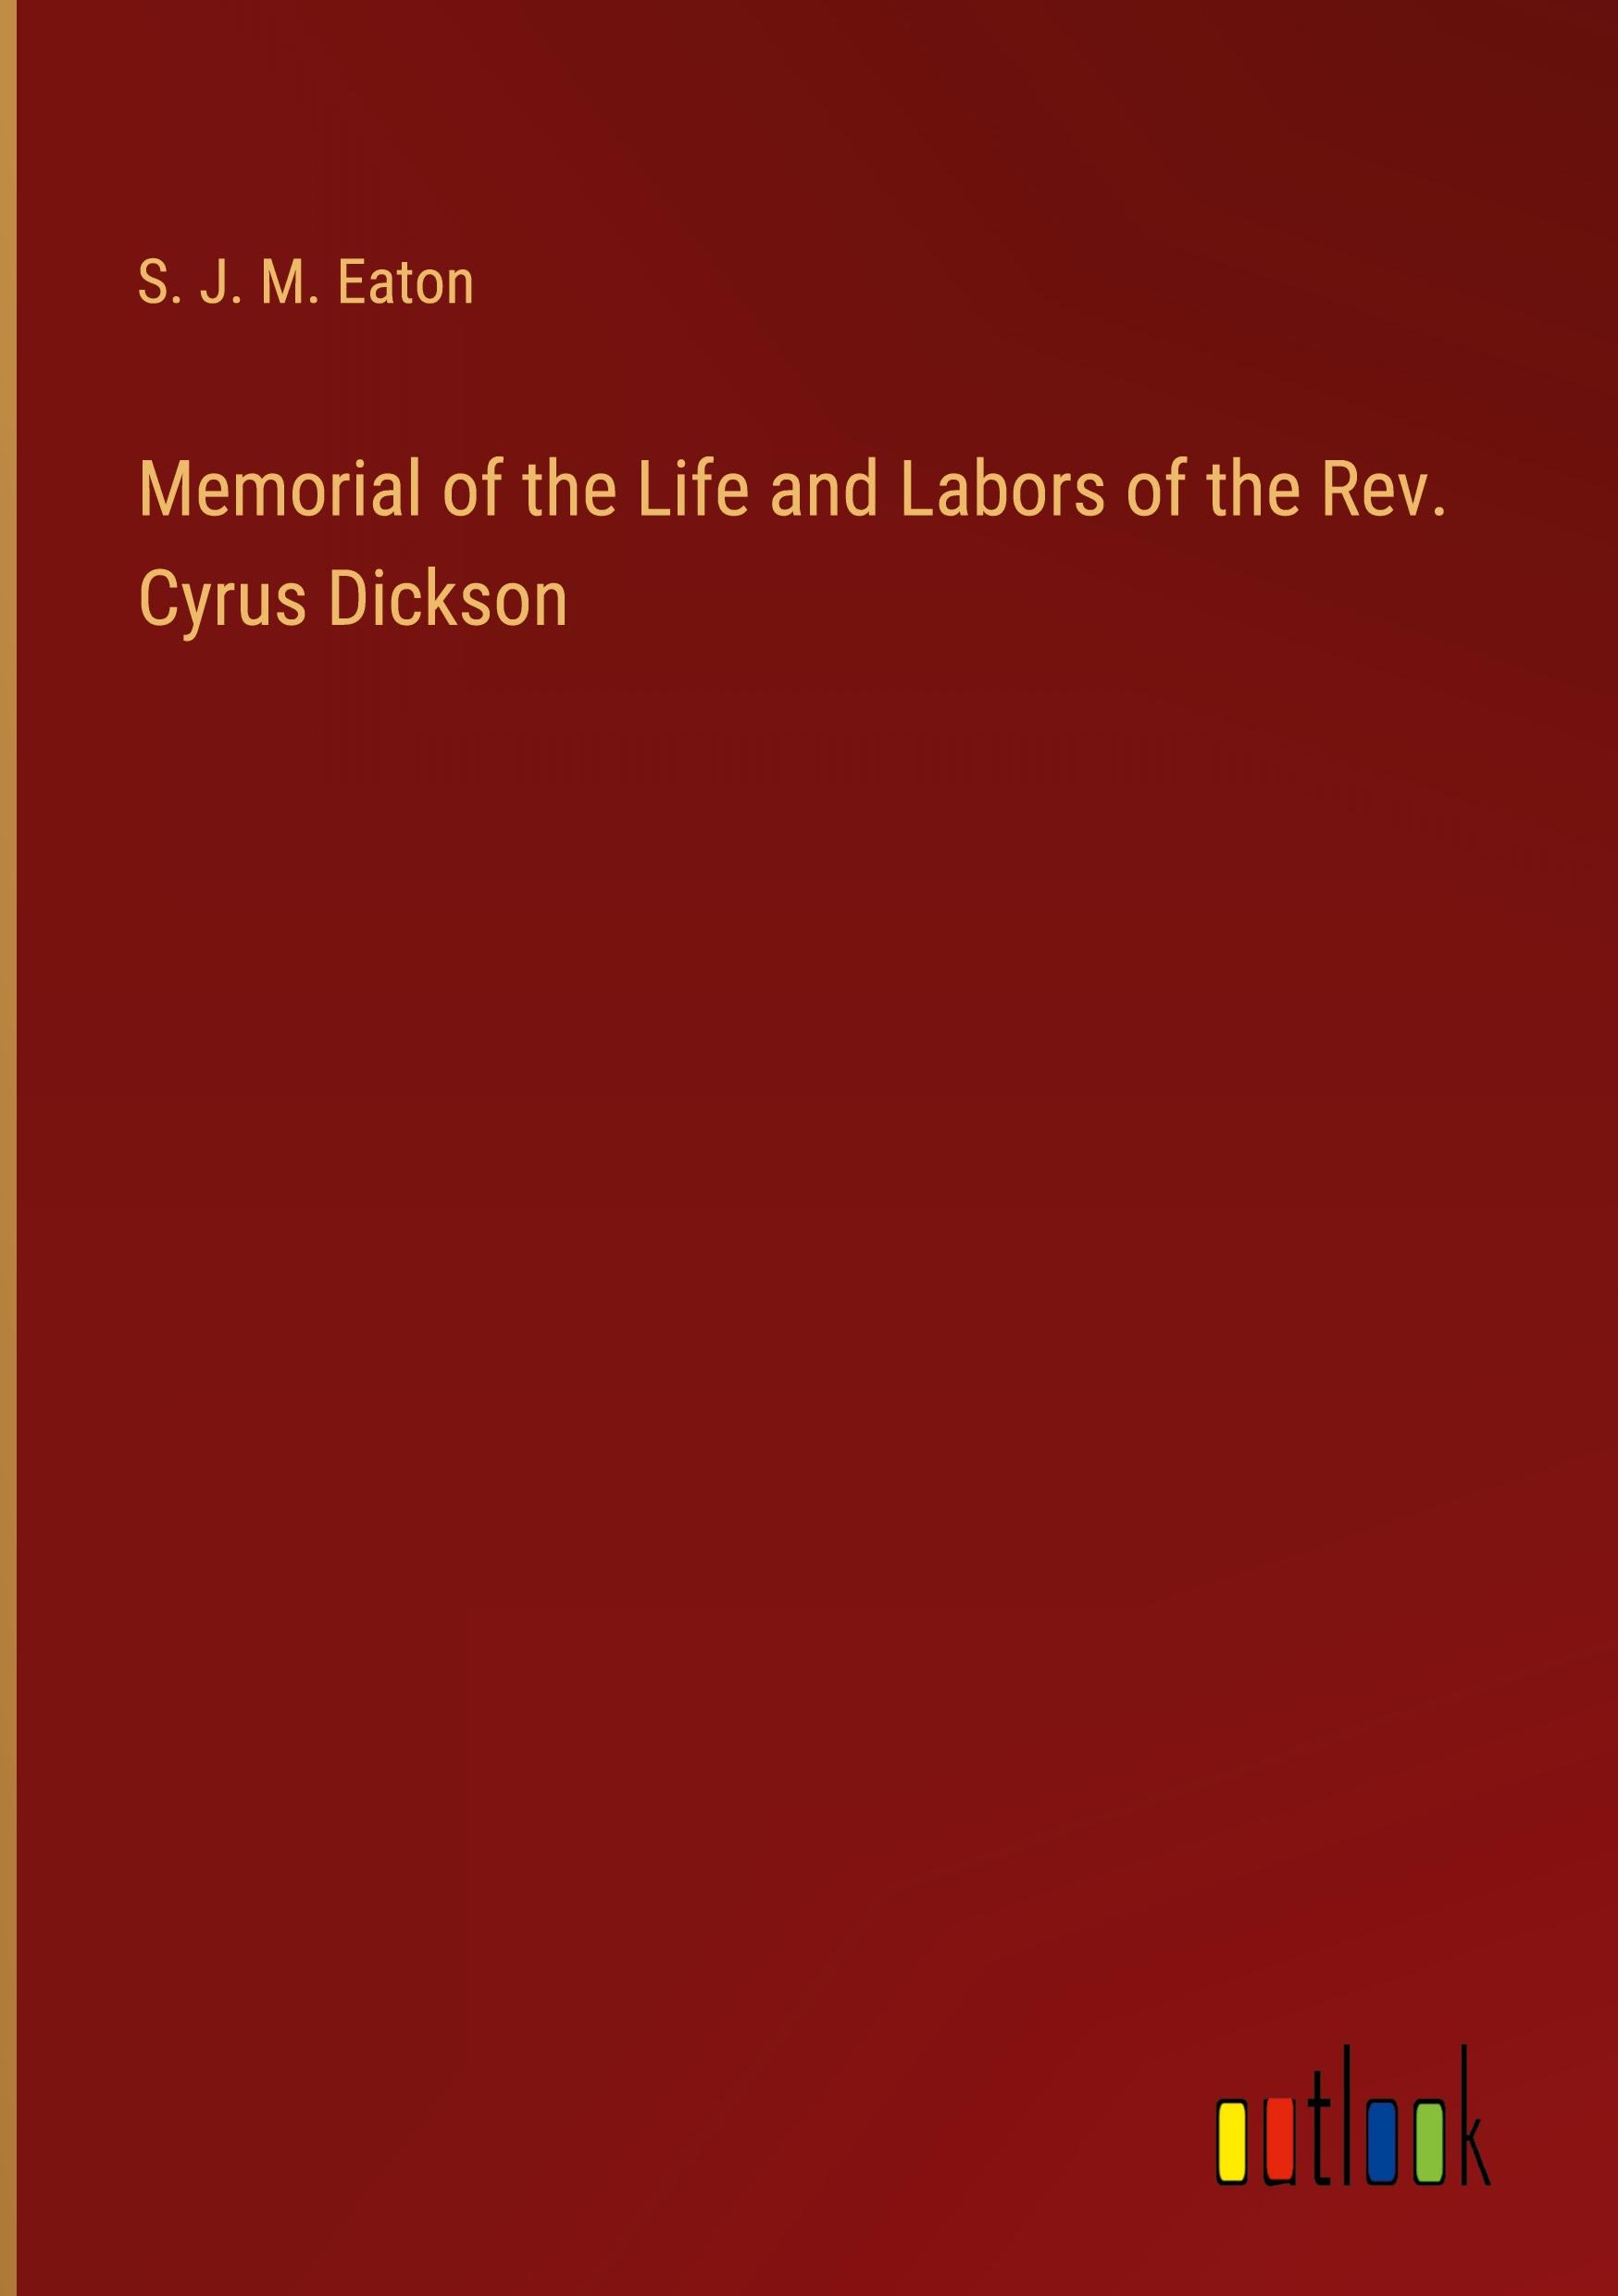 Memorial of the Life and Labors of the Rev. Cyrus Dickson